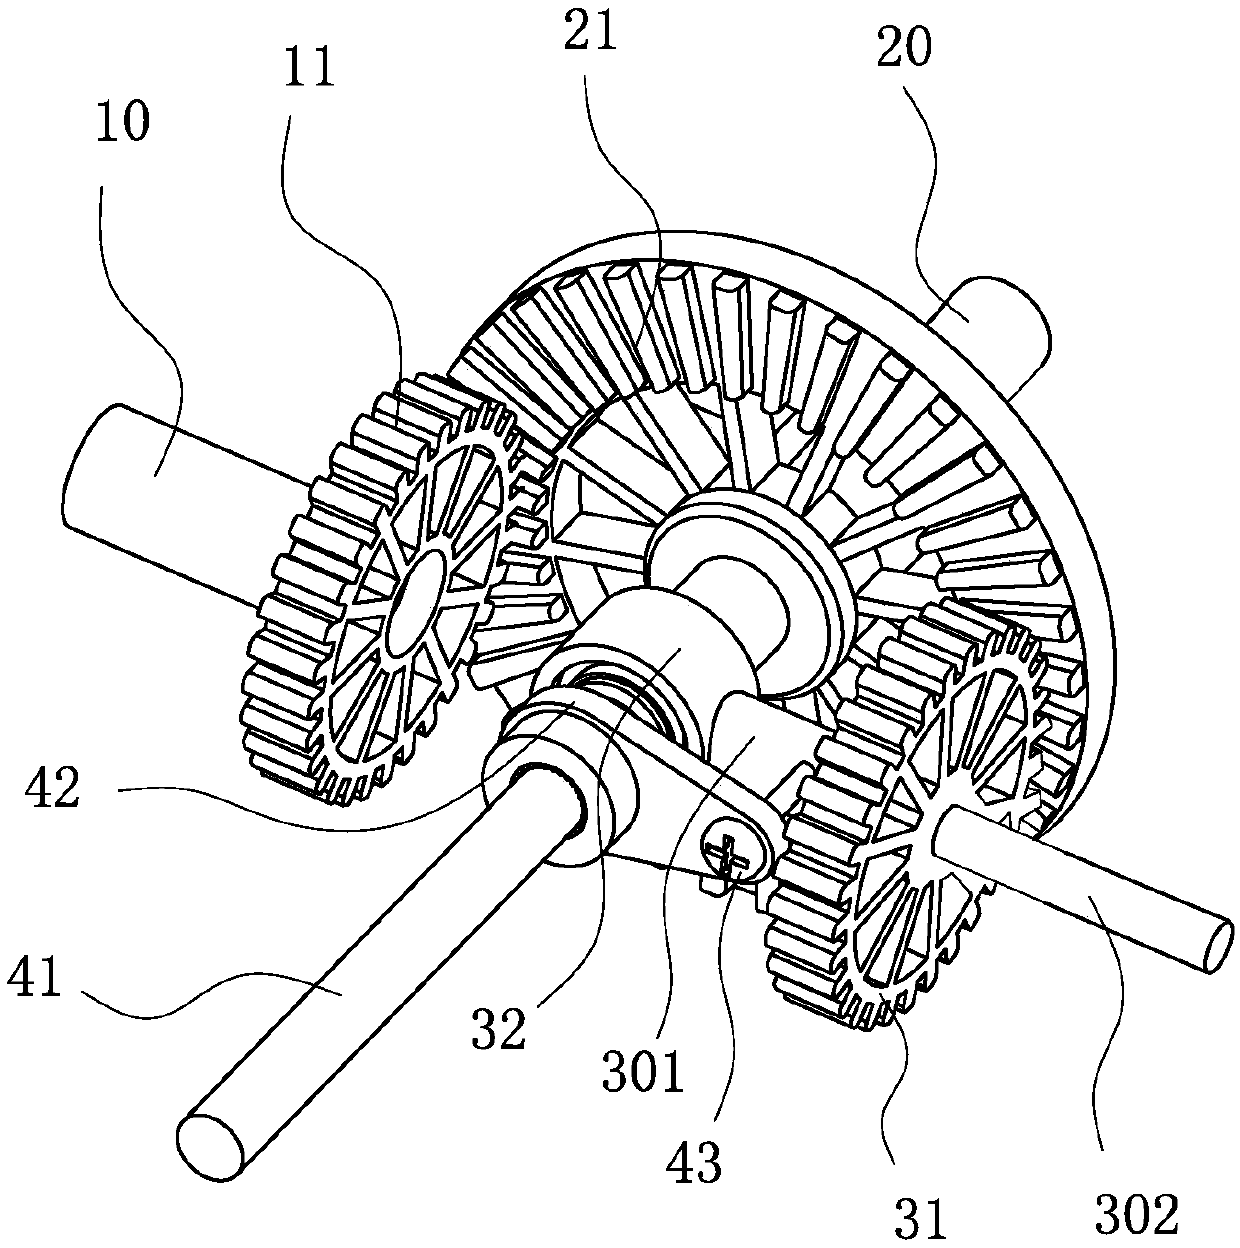 Transmission mechanism and tilting-rotor unmanned aerial vehicle